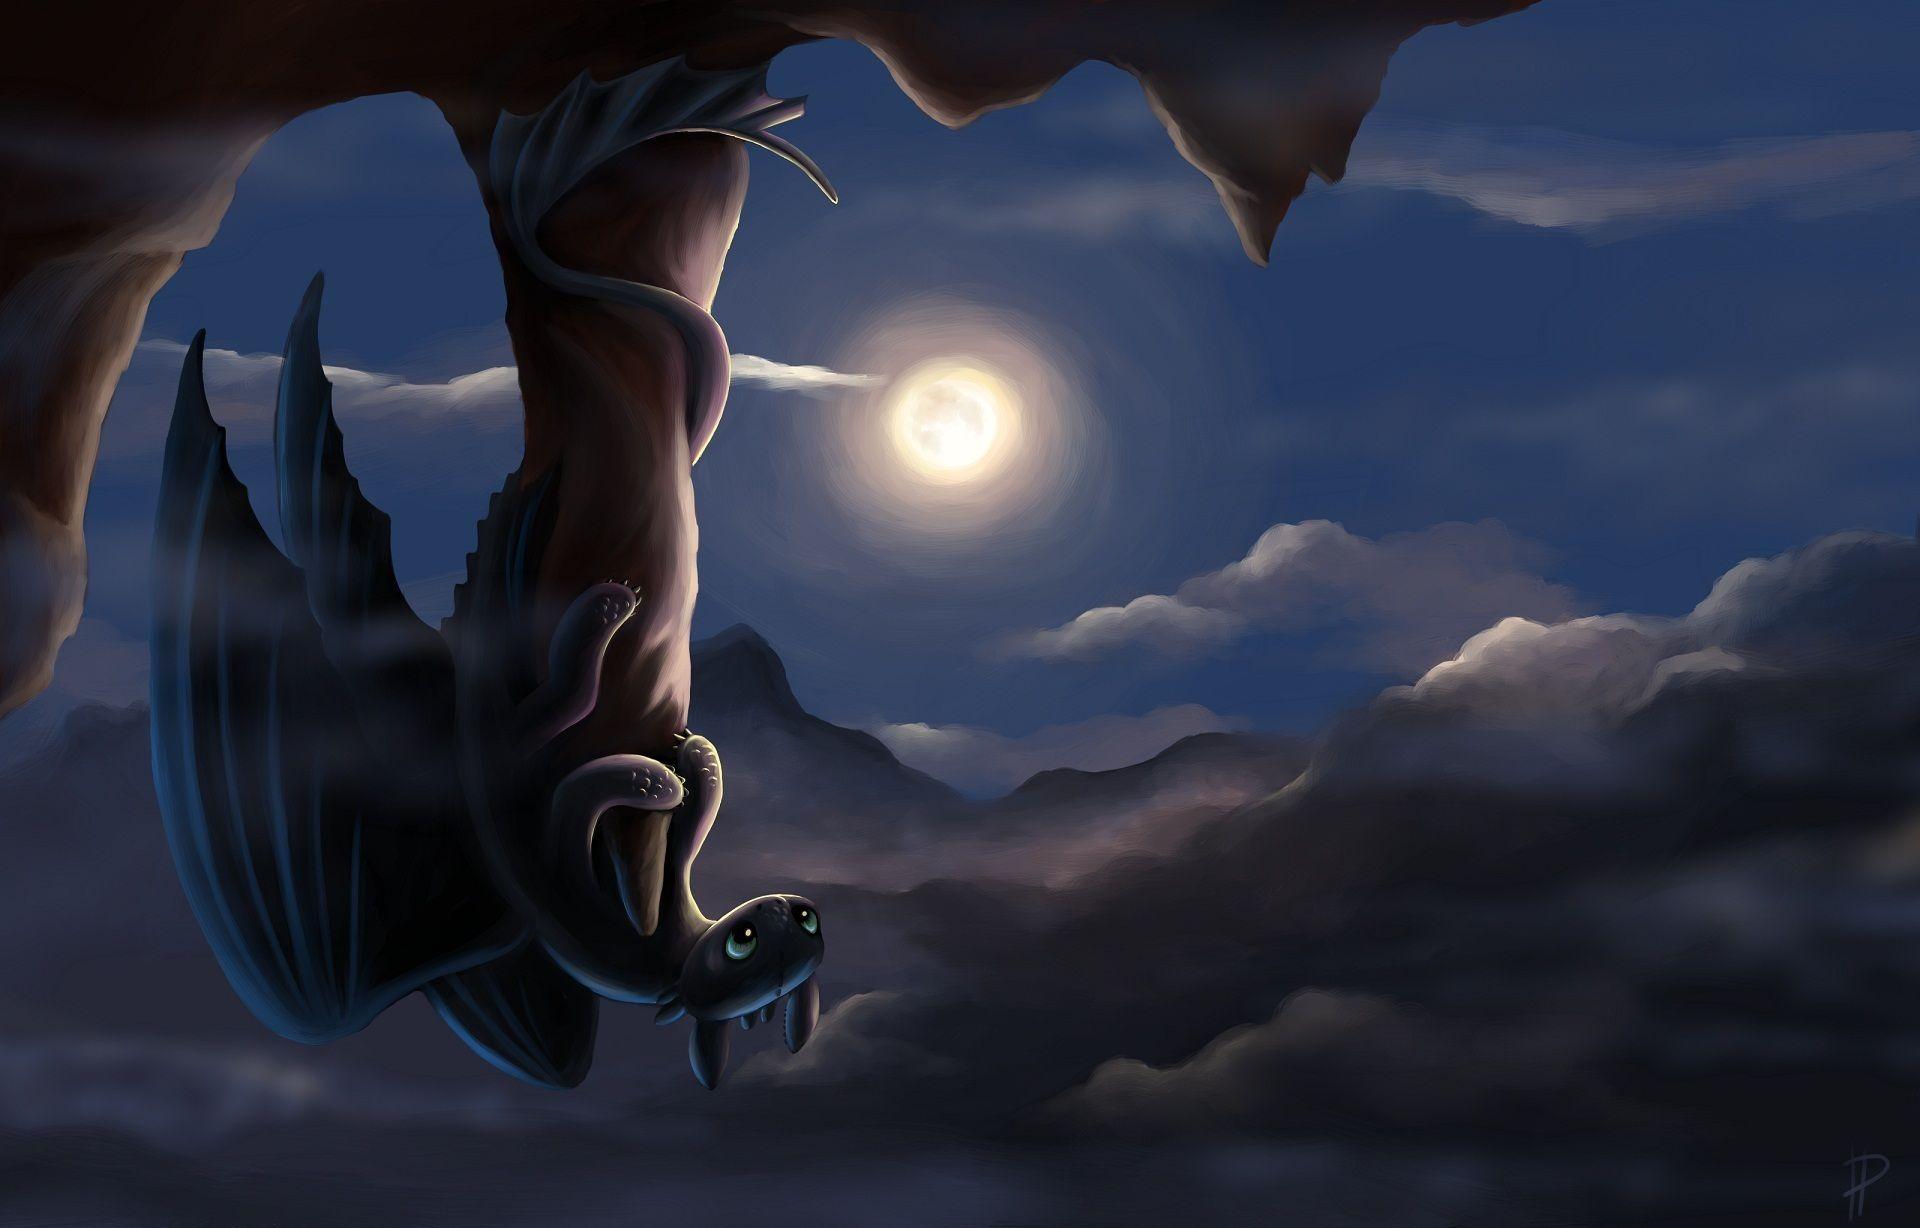 Picture How to Train Your Dragon Dragons Cartoons Moon Night